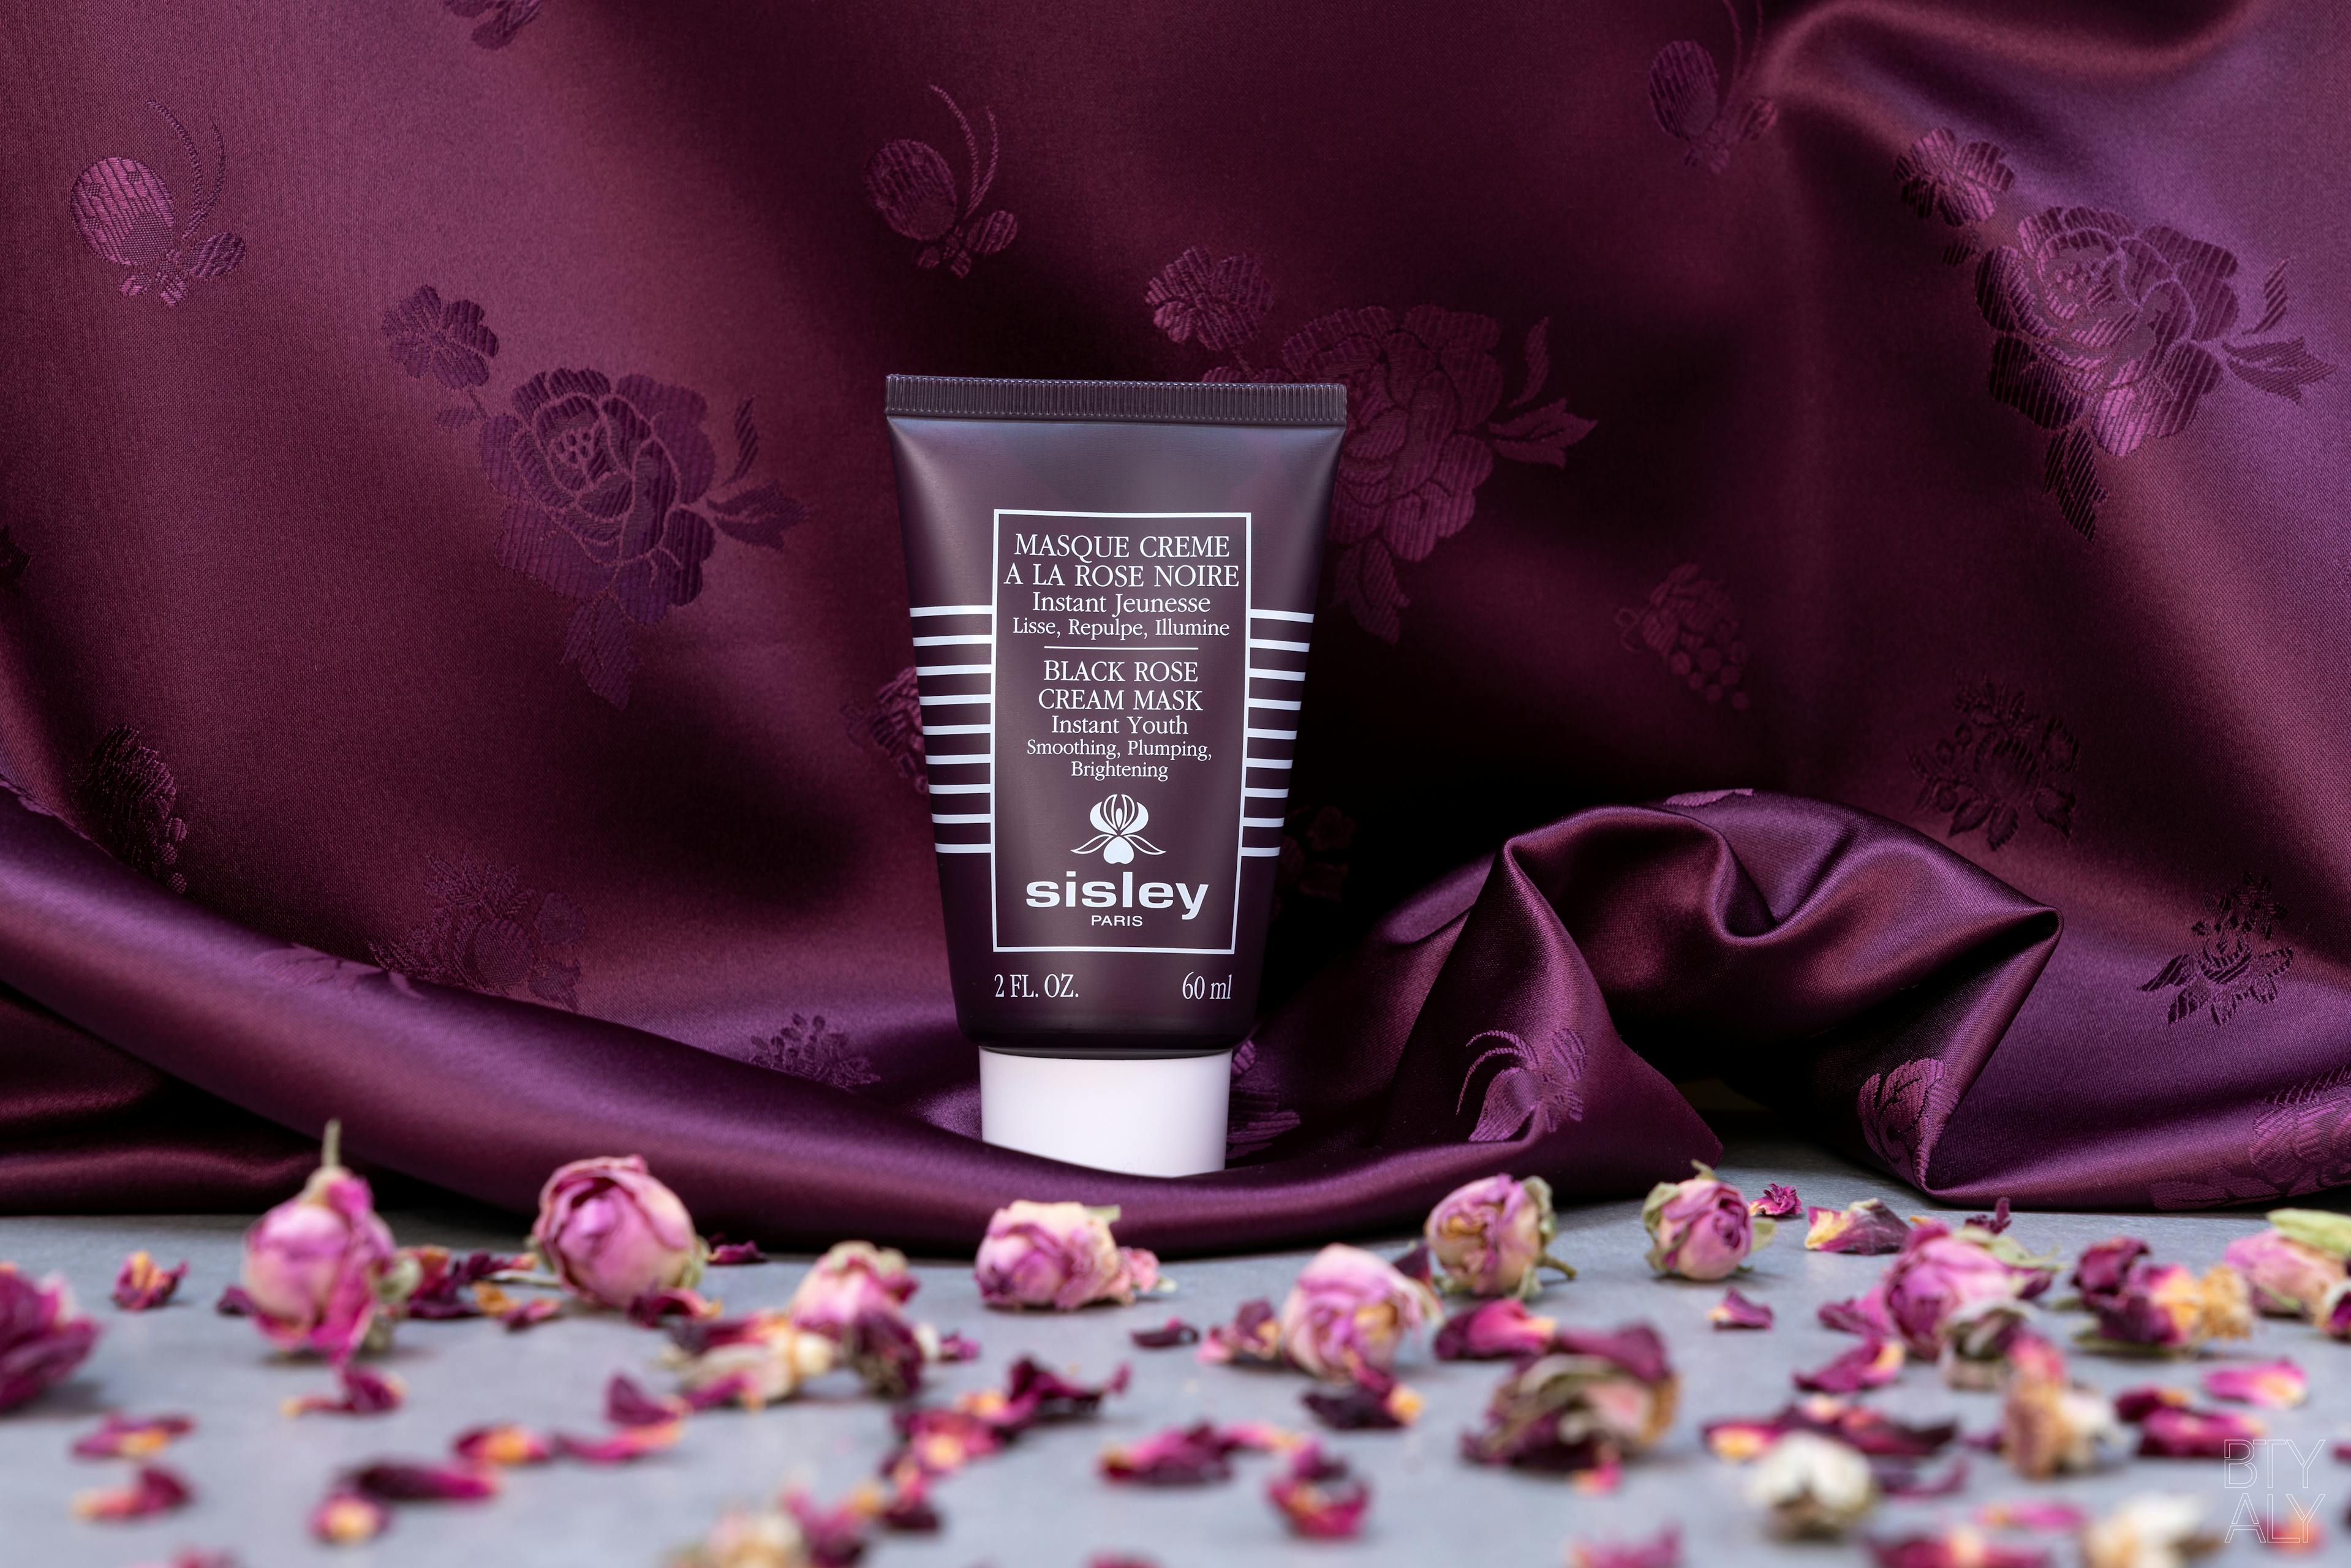 BTY Cream Rose Black Sisley Mask | ALY Review: